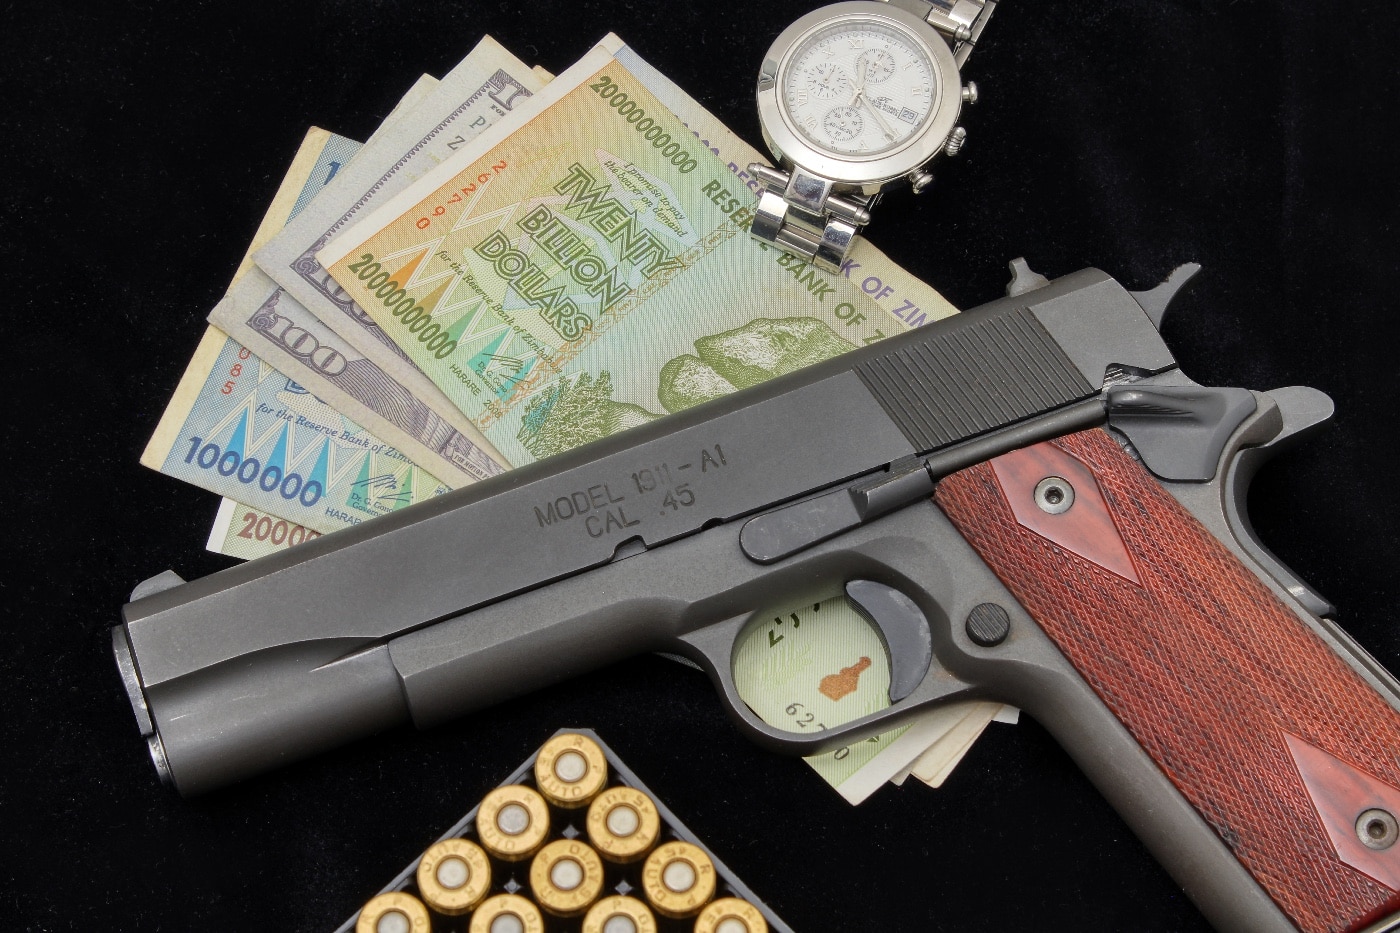 In this photo we see a M1911A1 pistol chambered for the .45 ACP cartridge. The handgun was the standard sidearm of the United States military. Also shown in the photo is ammunition, a wrist watch, paper currency money and more. M1911A1 pistol as an investment